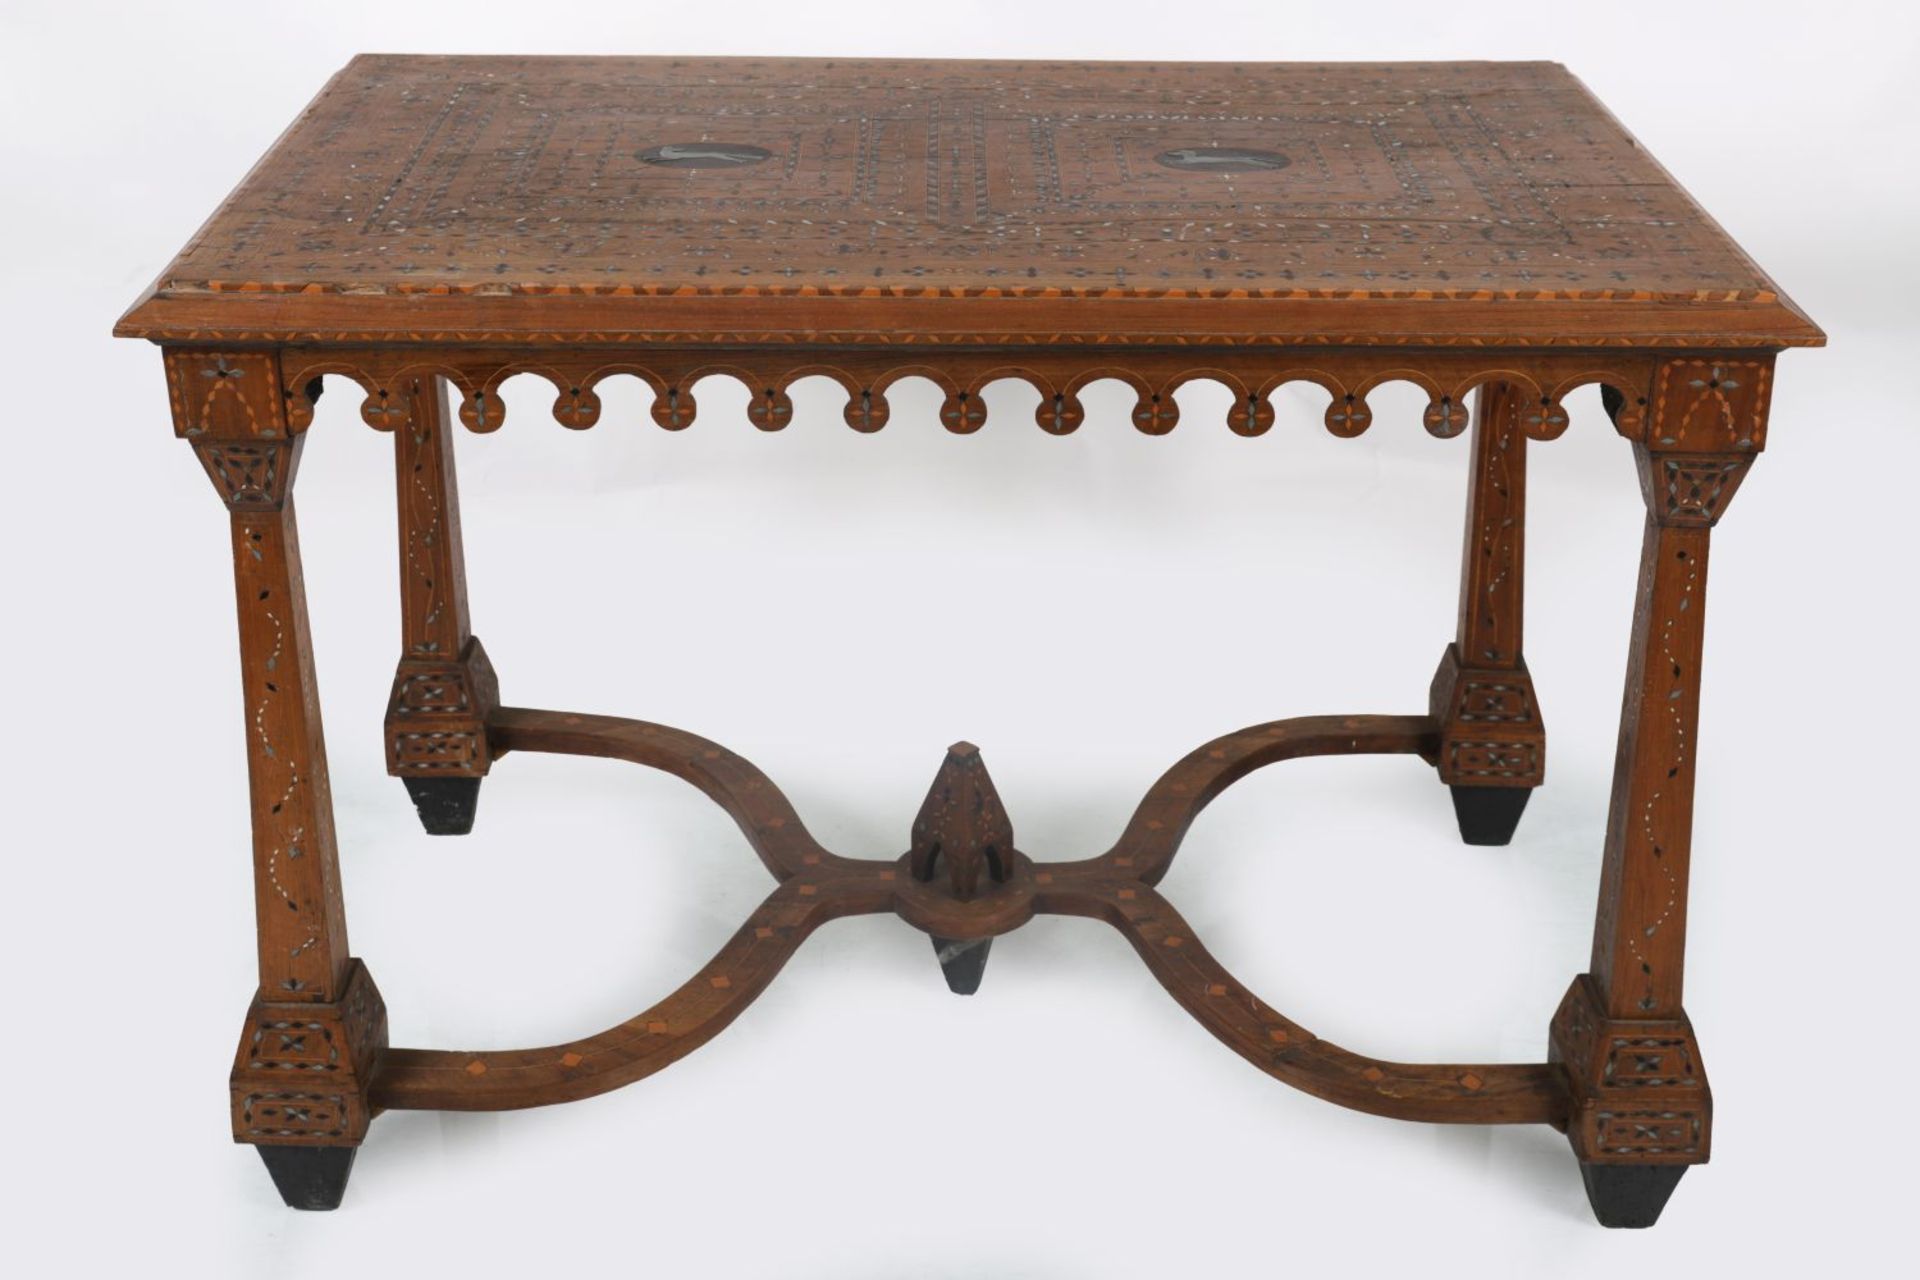 19TH-CENTURY OTTOMAN MARQUETRY CENTRE TABLE